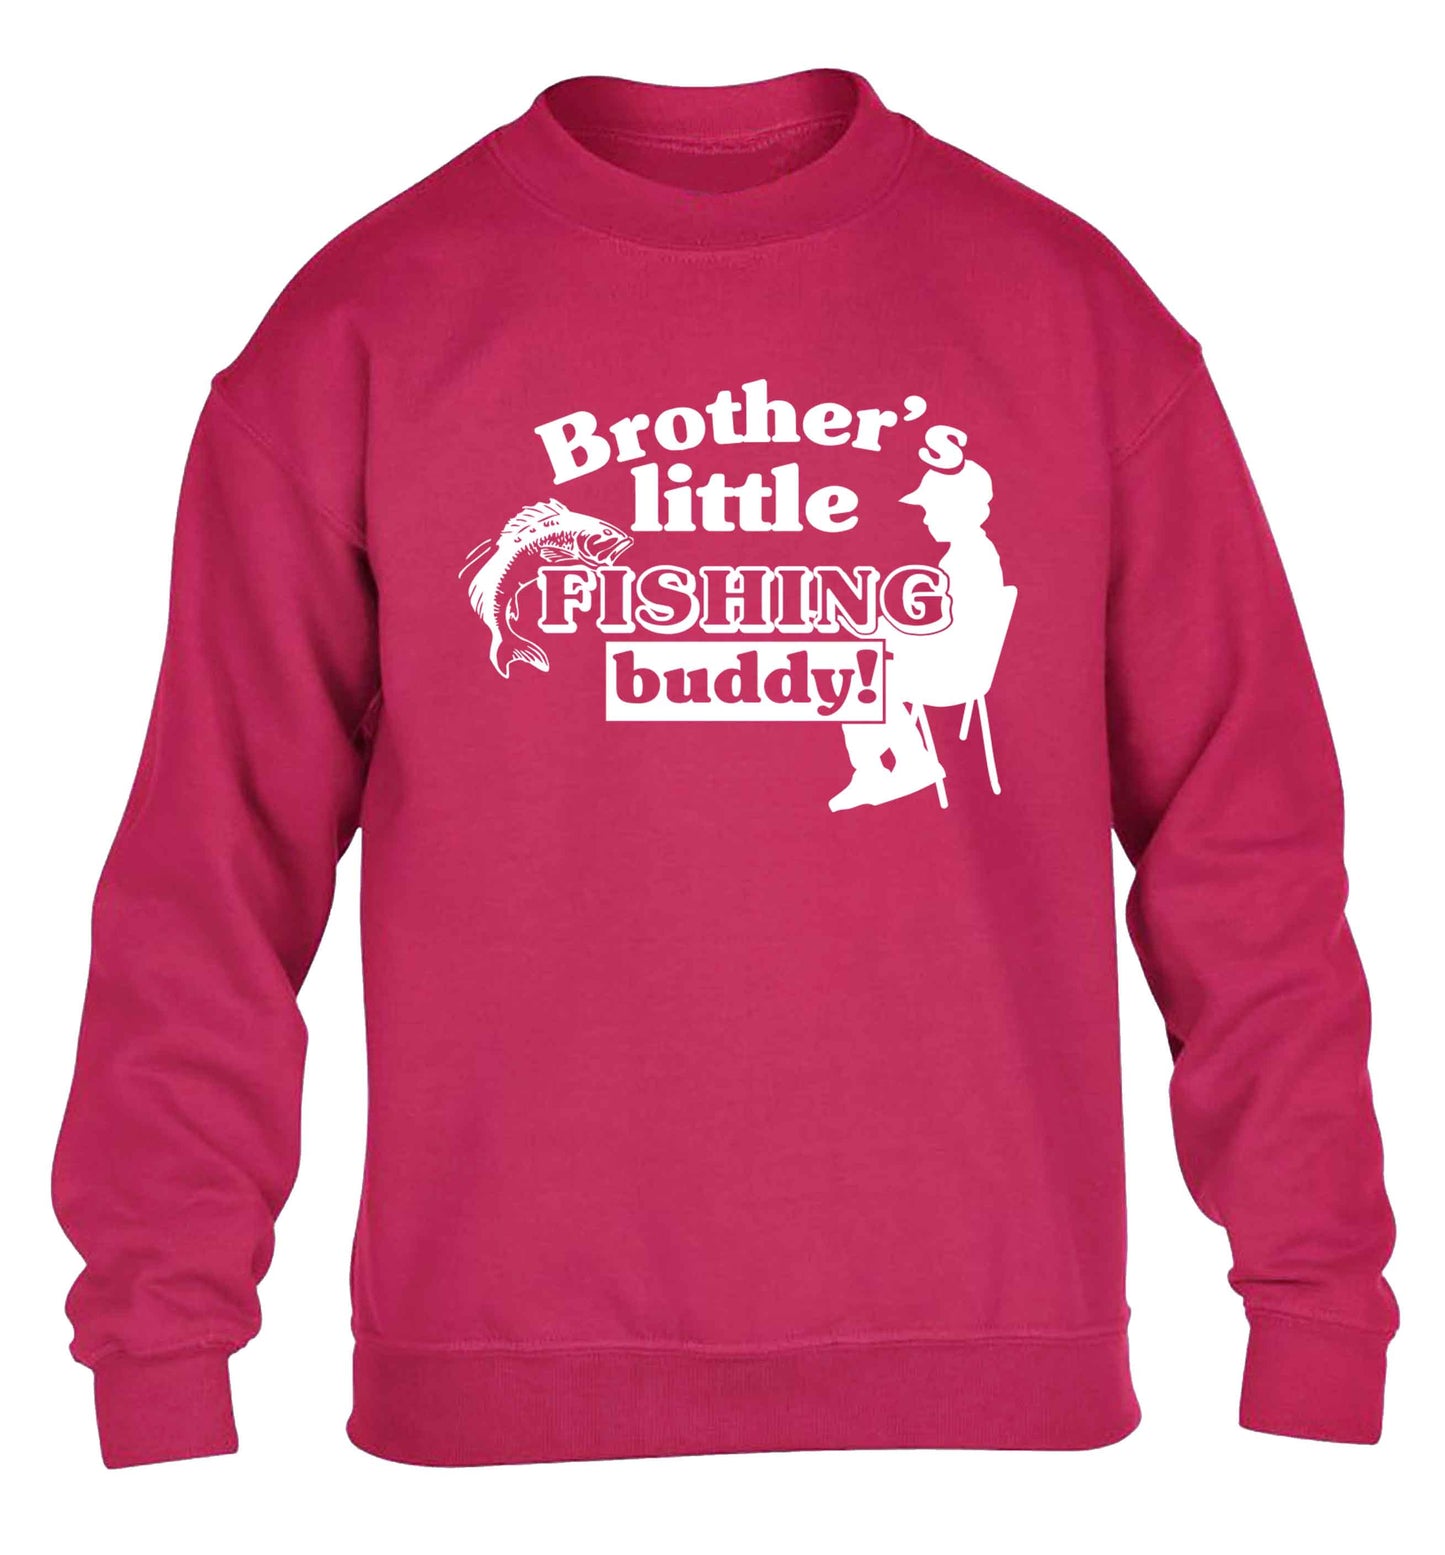 Brother's little fishing buddy children's pink sweater 12-13 Years